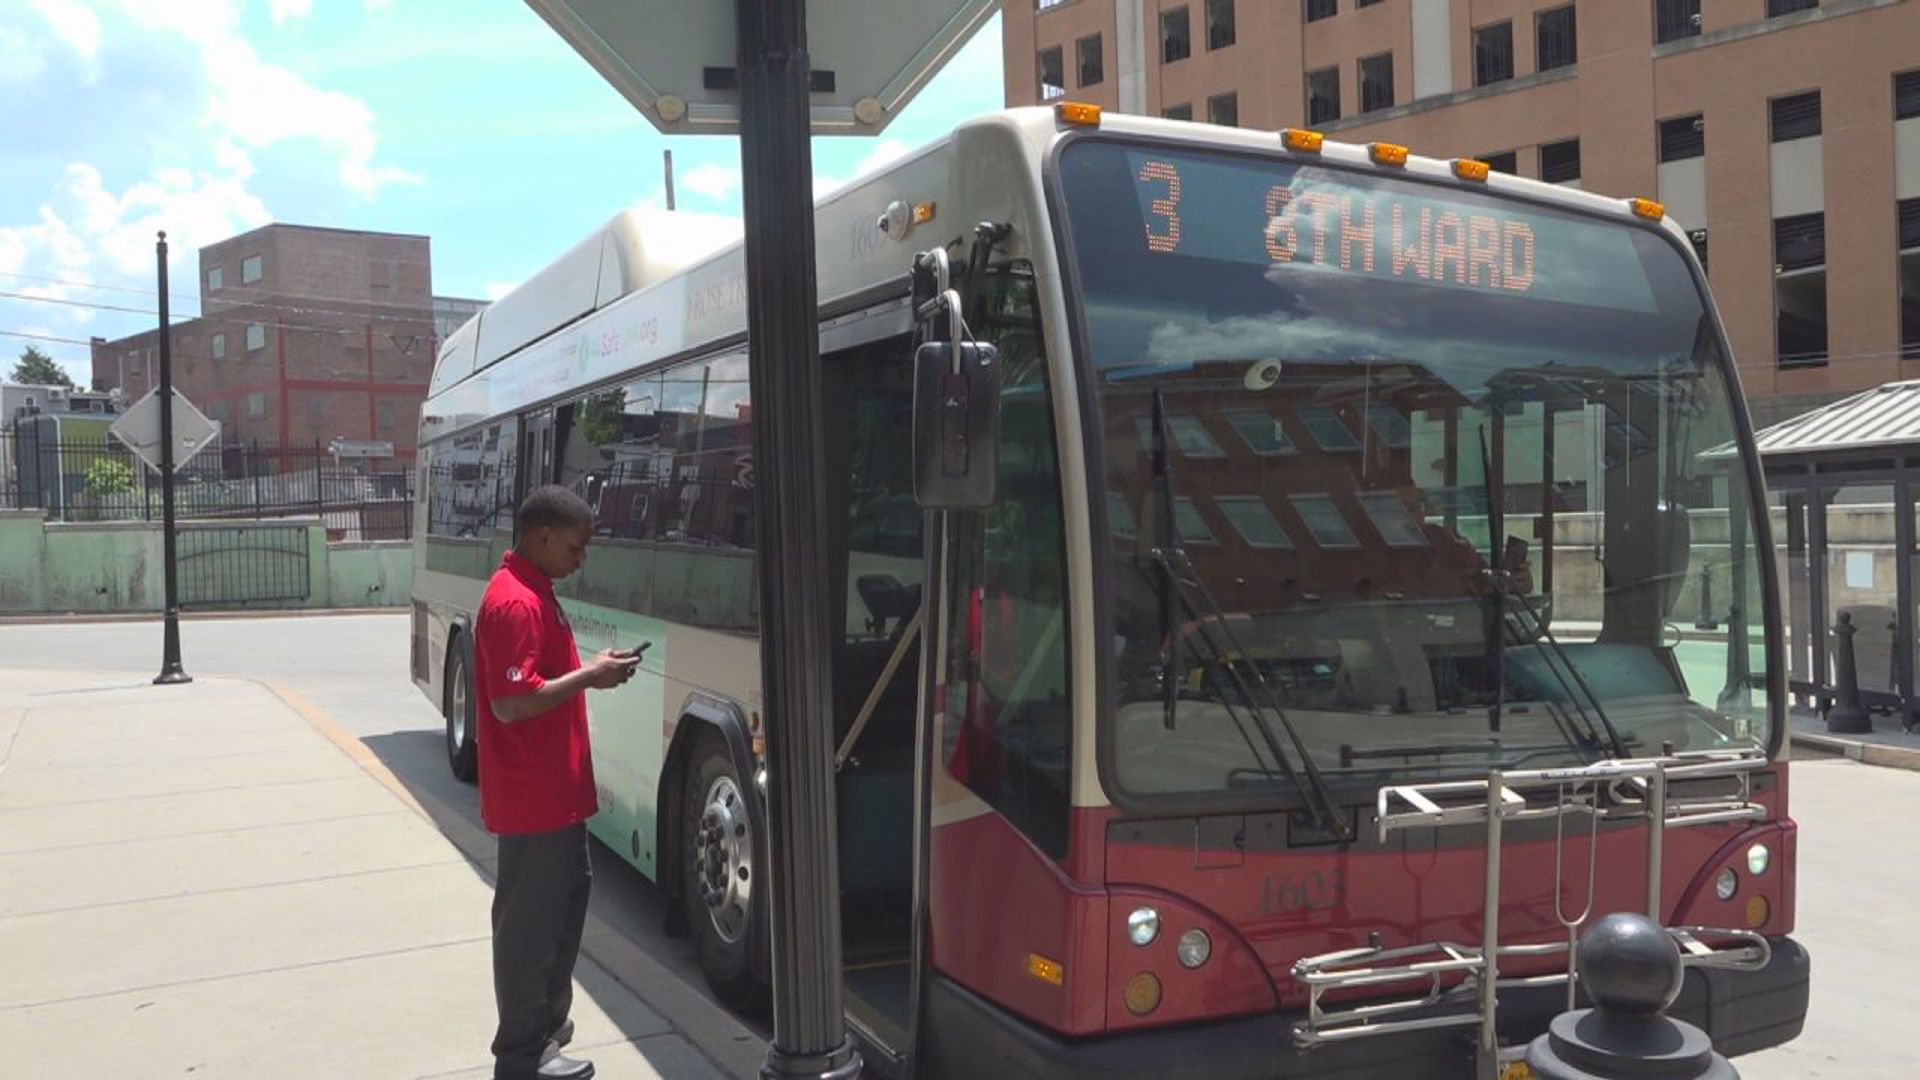 After roughly 40 years, changes are coming to the Red Rose Transit Authority routes and schedules to meet more customers needs.